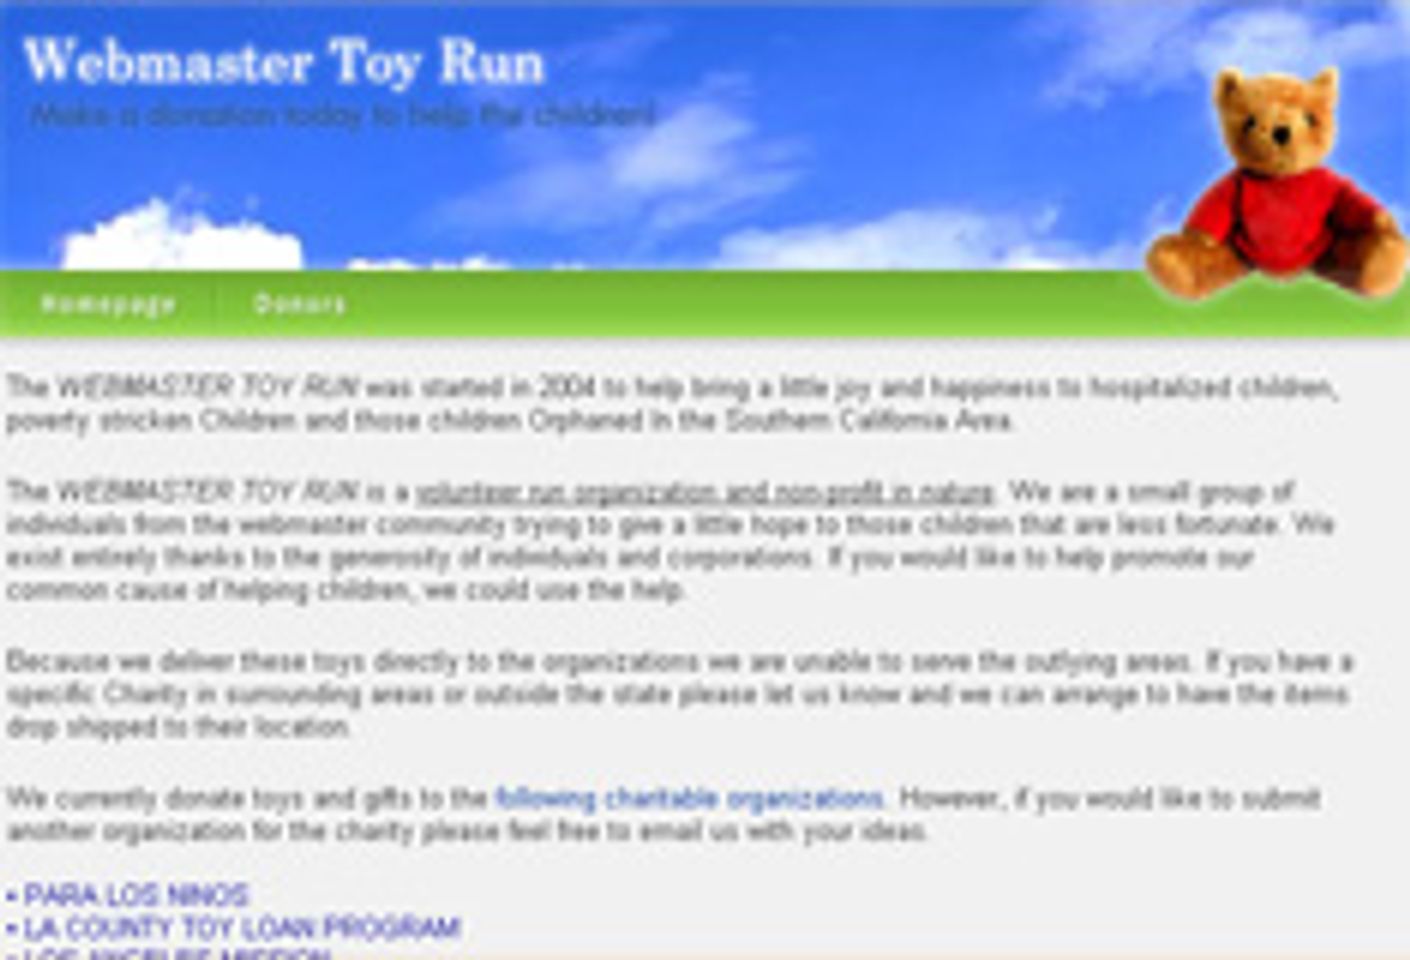 Adult Industry Delivers Toys to Children for the Holidays: WebmasterToyRun.com